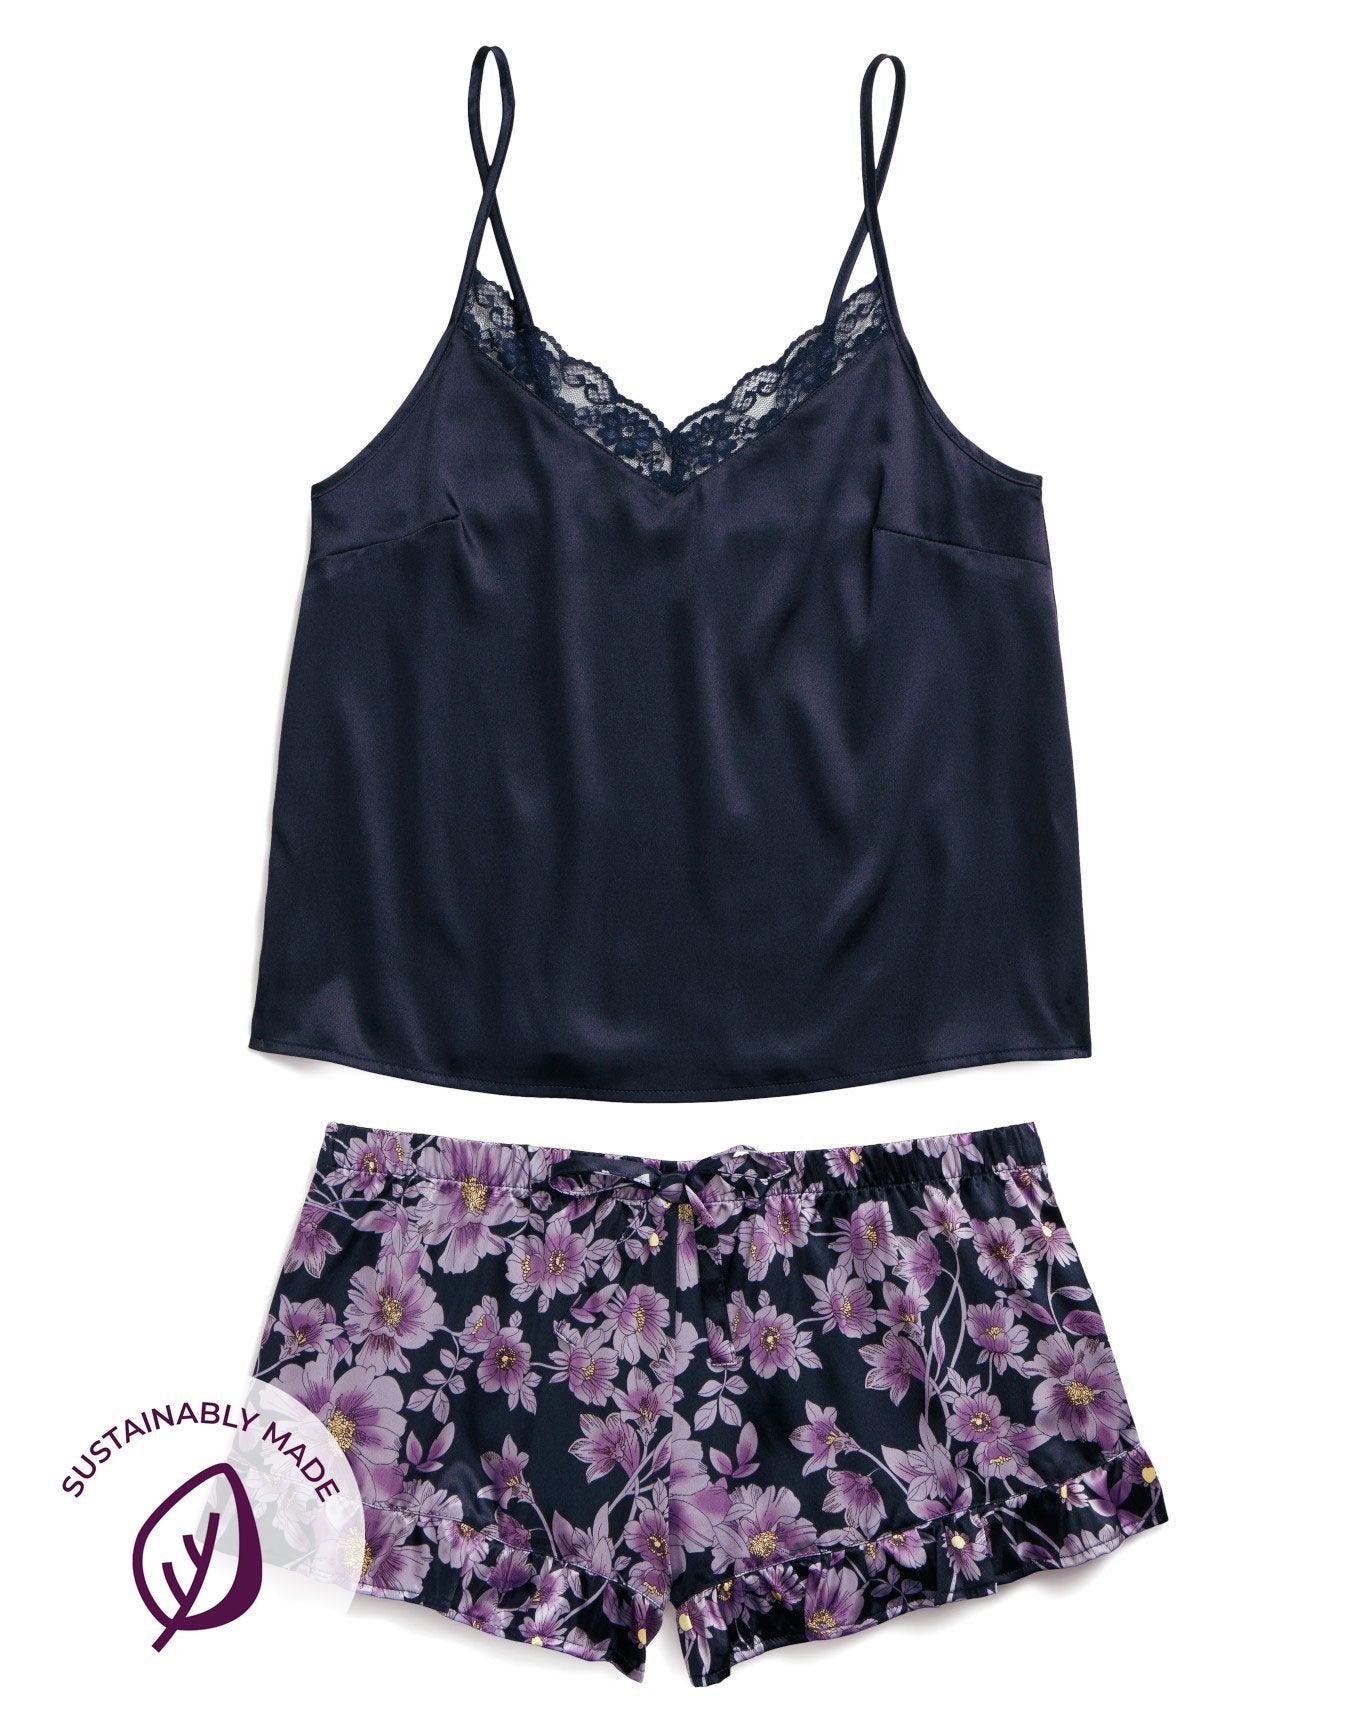 Adore Me Luana Camisole & Short Set in color Floral Opulence C01 and shape pj